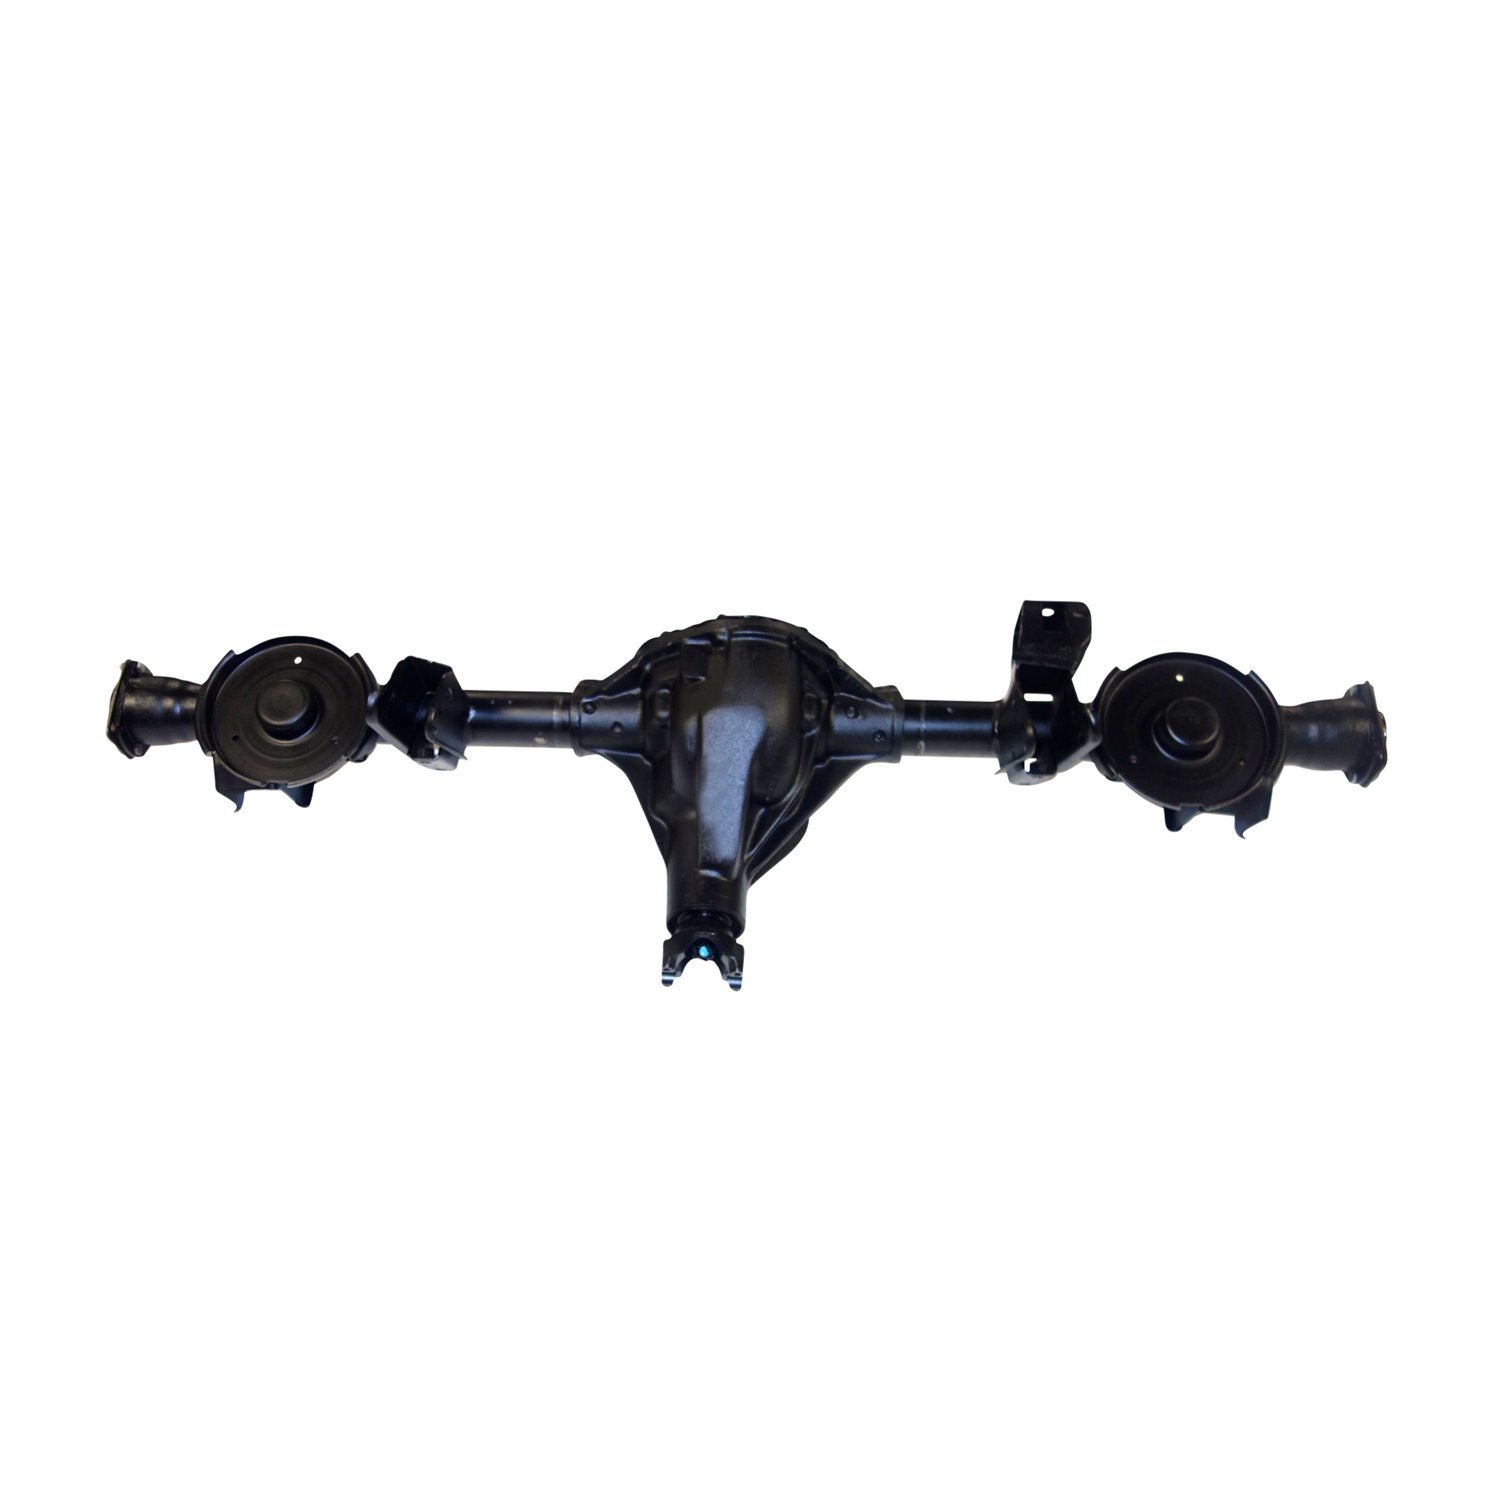 Remanufactured Complete Axle Assembly for Dana 44 07-15 Jeep Wrngler 3.73 Ratio